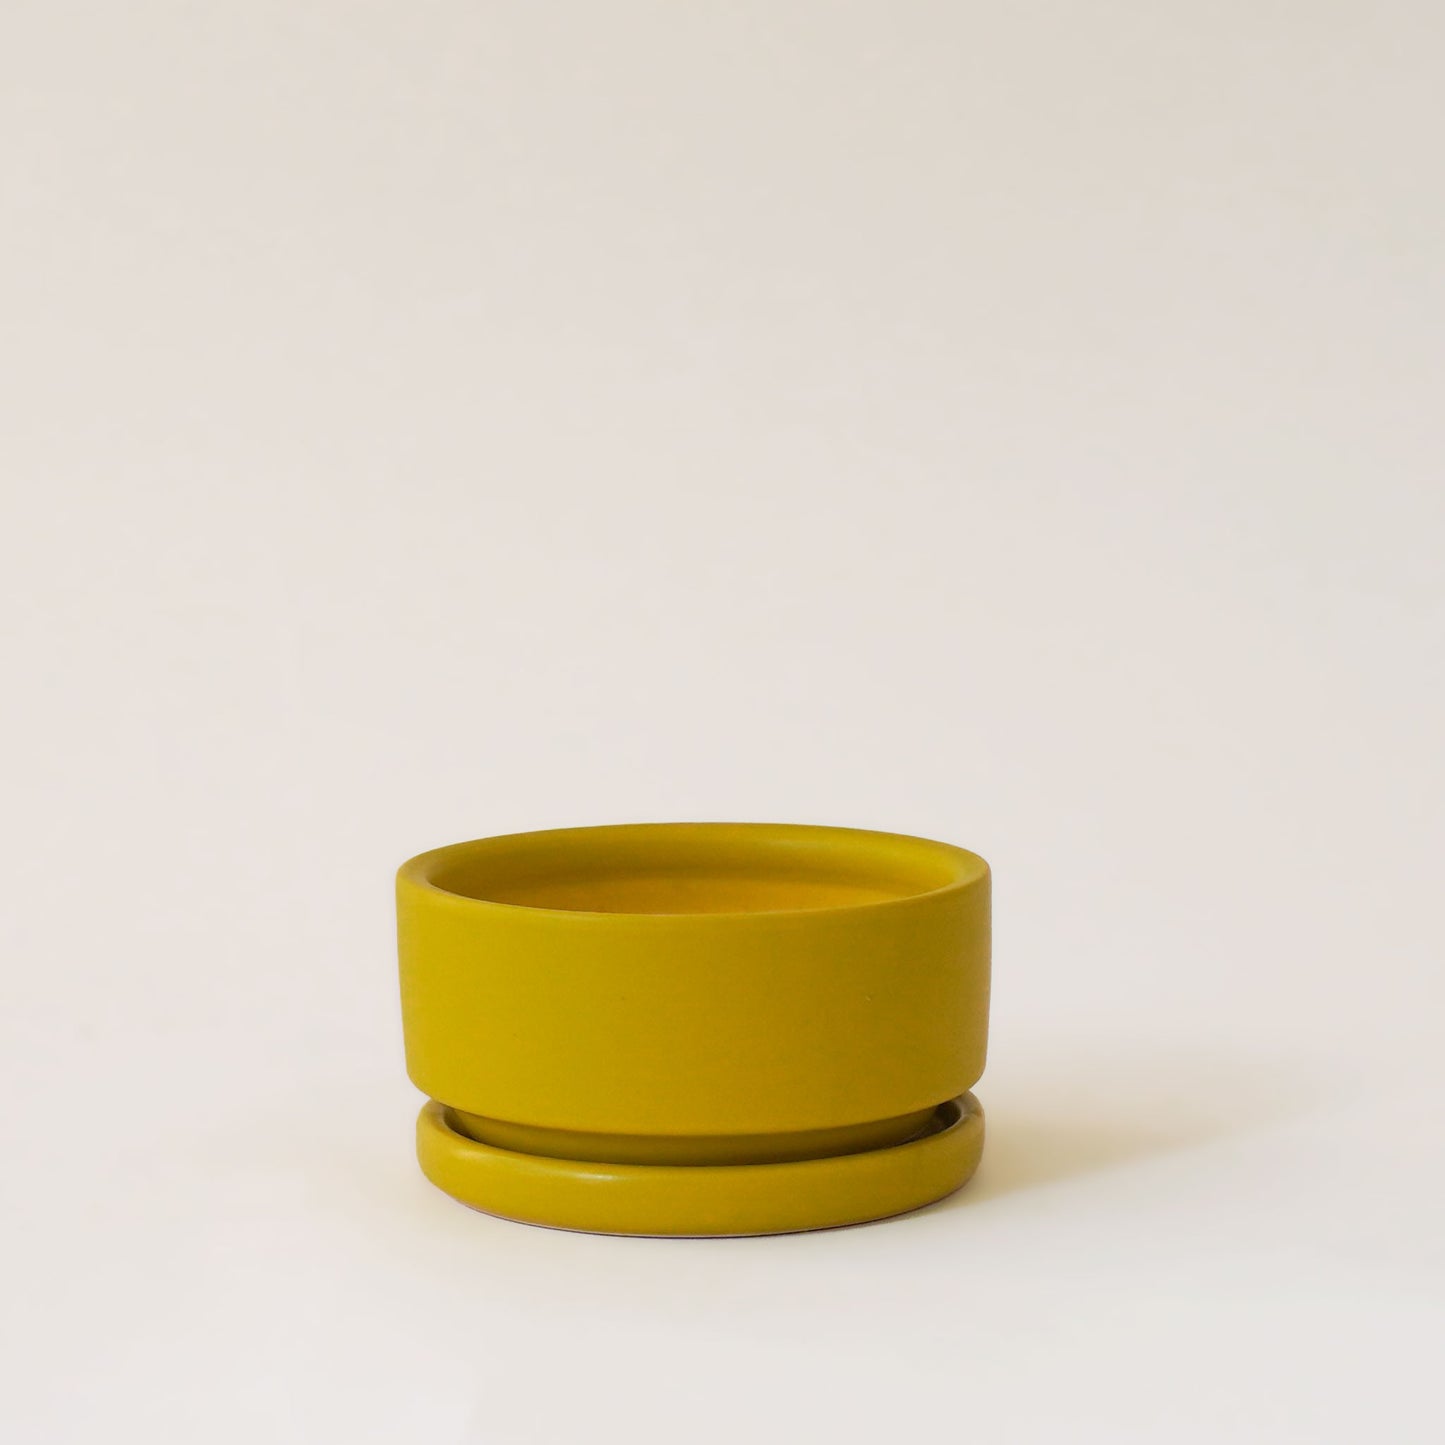 Chartreuse short and wide bowl planter complete with matching water tray below.